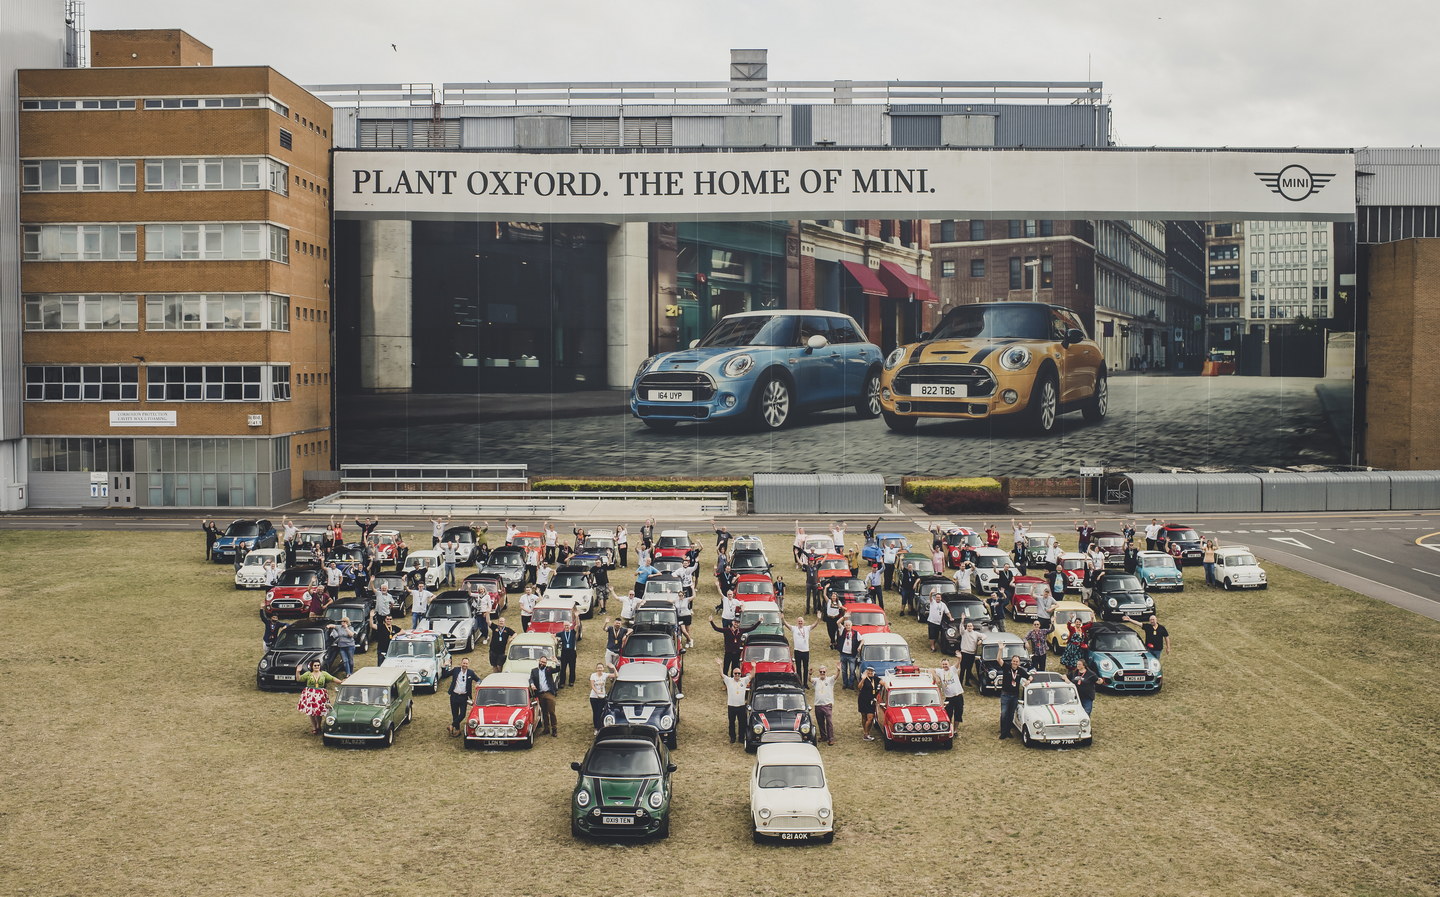 electric mini production could continue in oxford after £500m investment and £75m taxpayer contribution